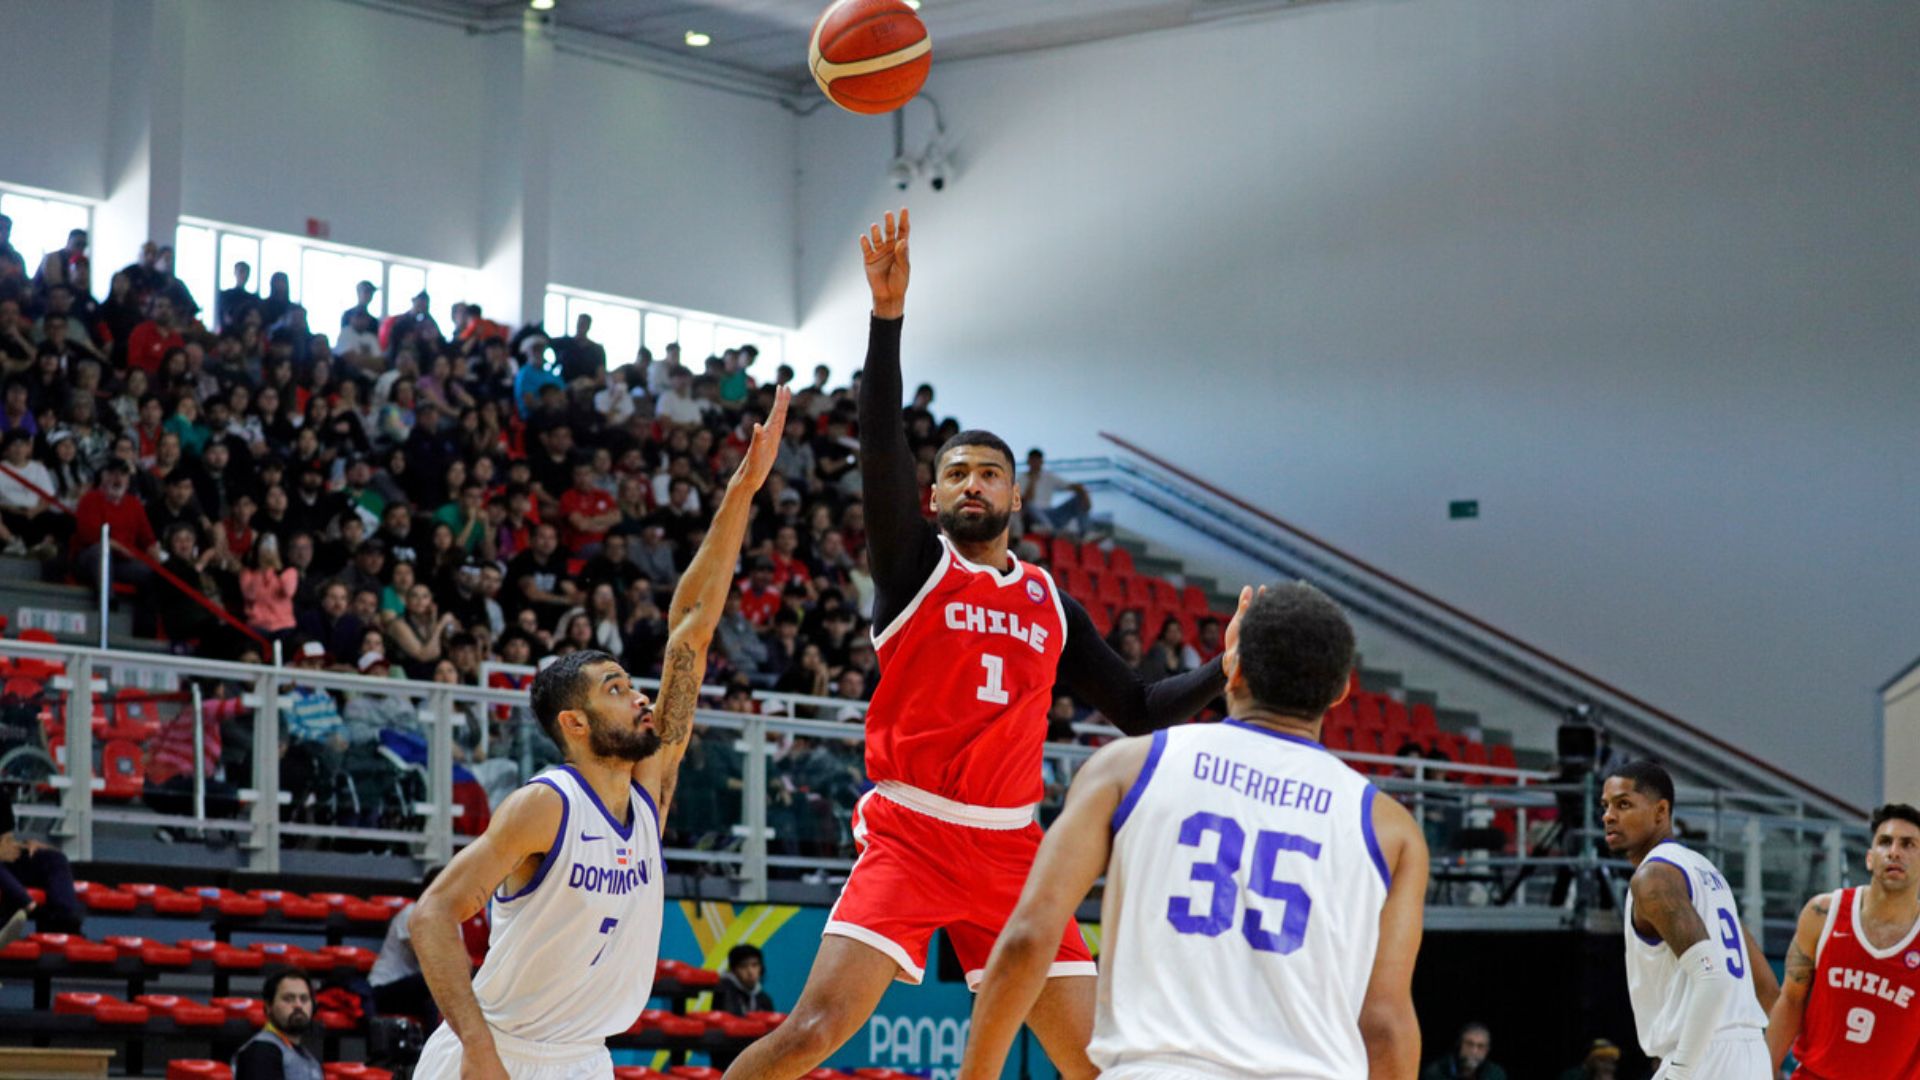 Male Basketball: Chile defeated the Dominican Republic and Secured Fifth Place